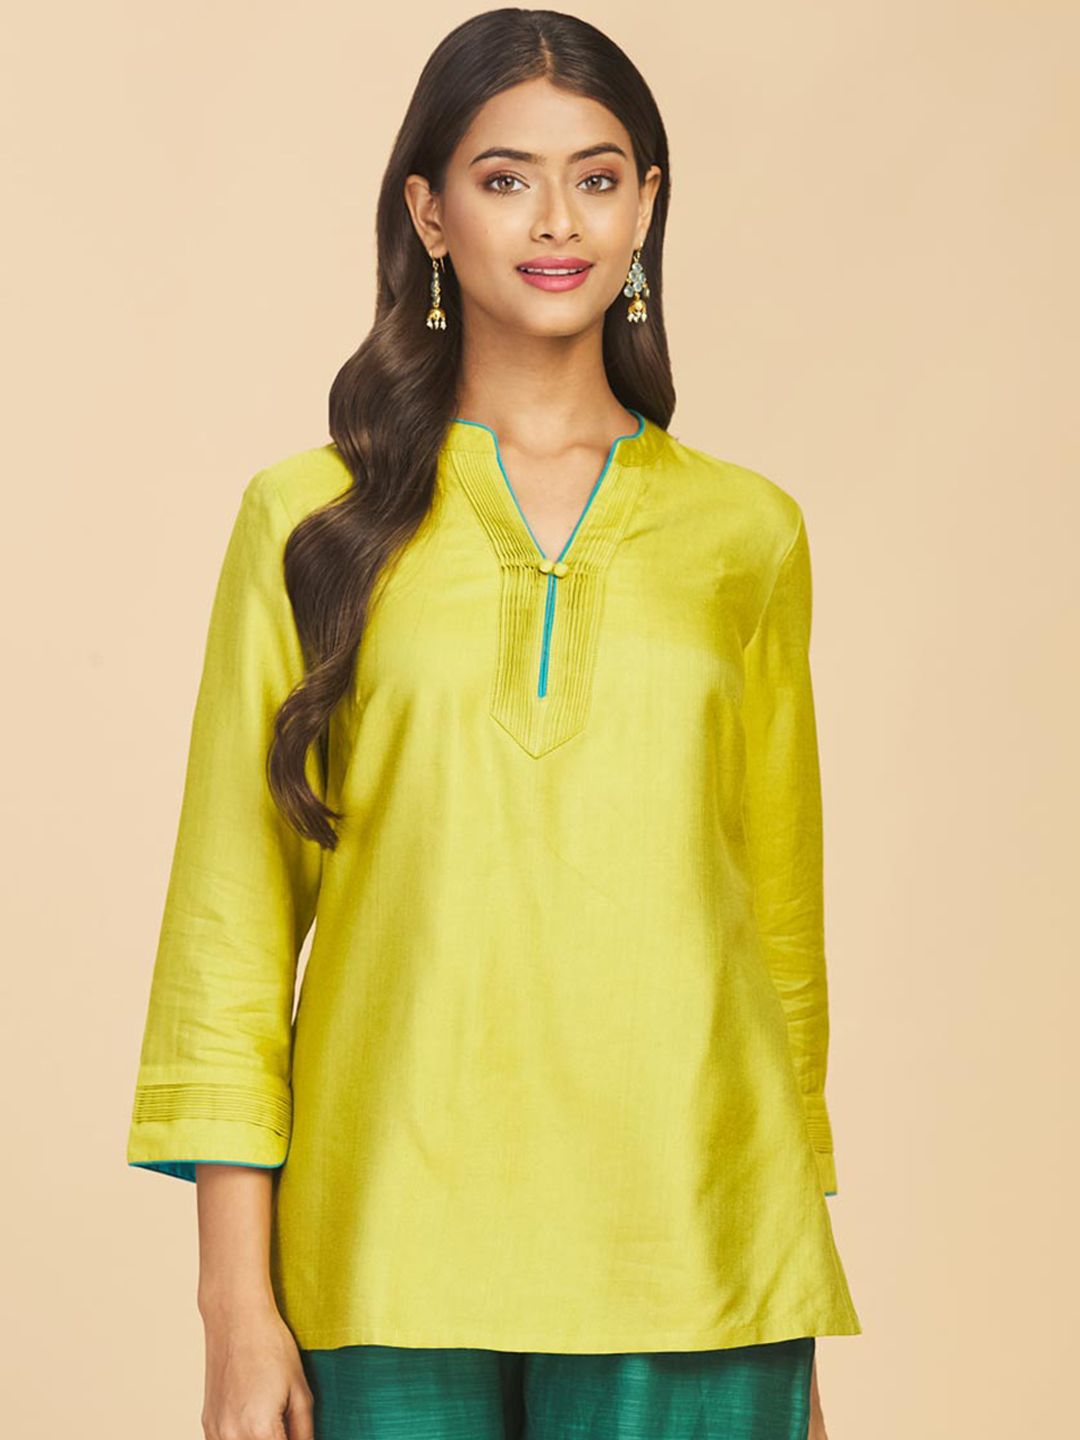 Fabindia Women Lime Green Solid V-Neck Kurti Price in India